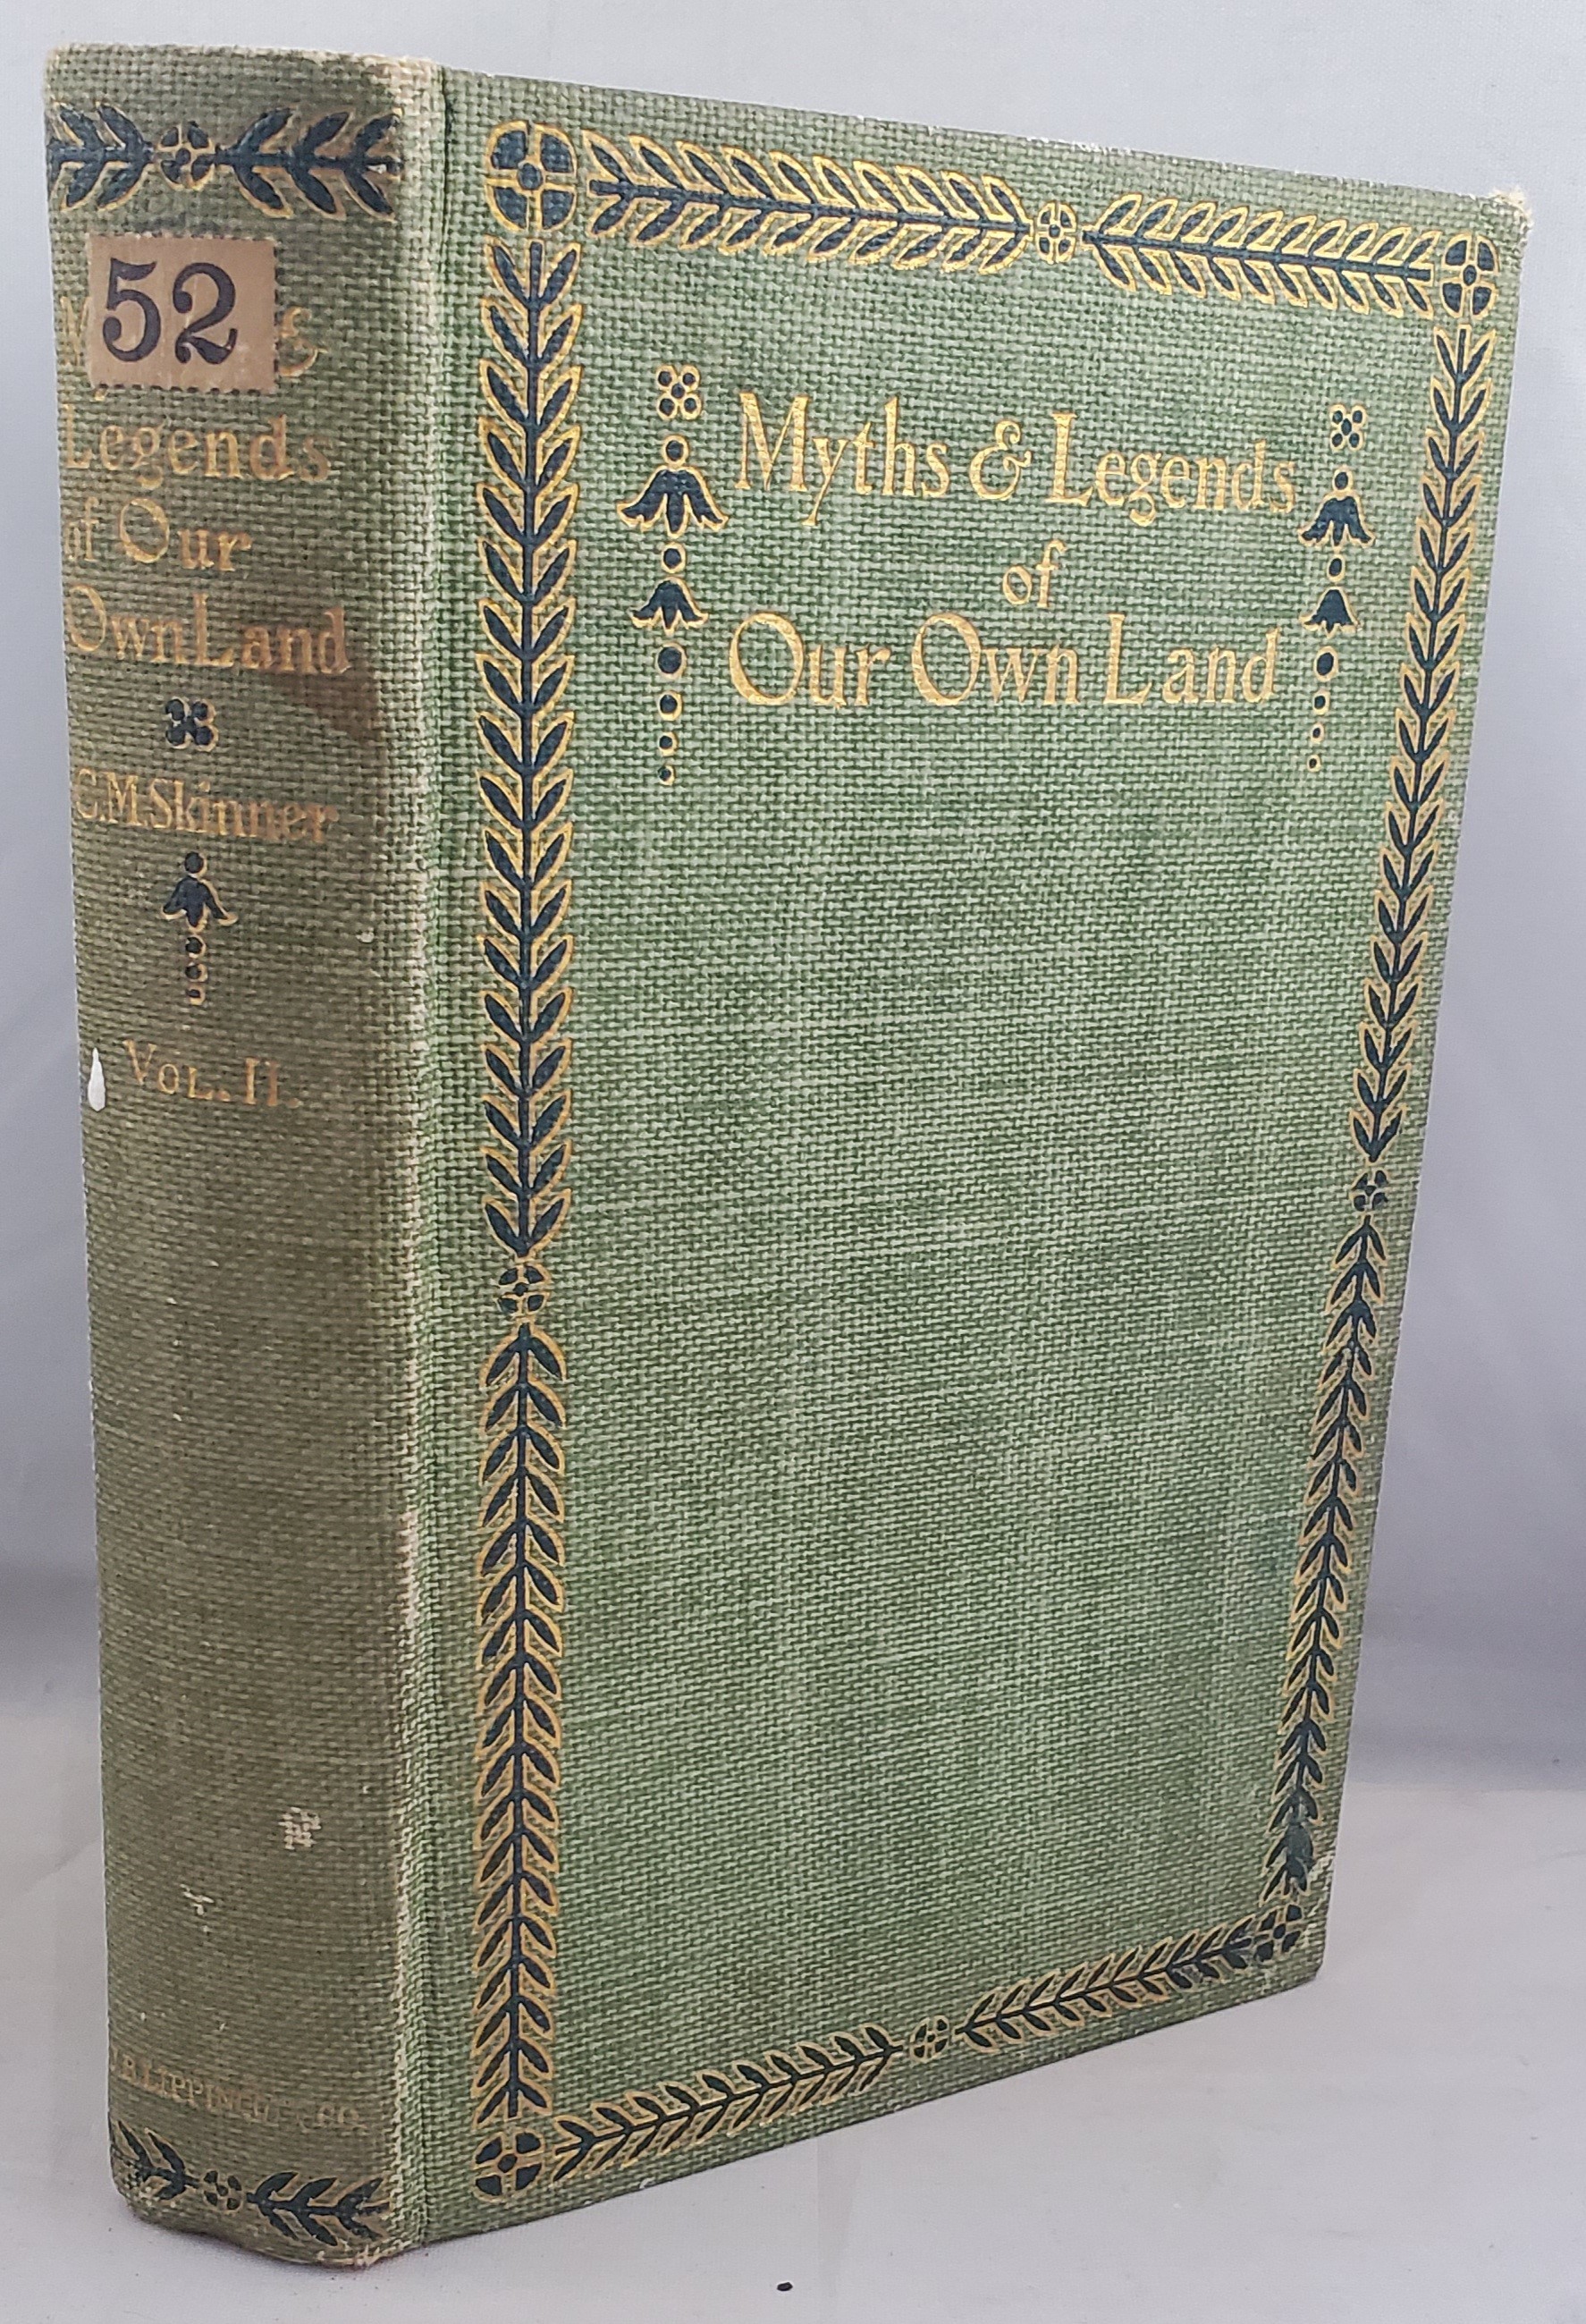 myths & legends of our own land